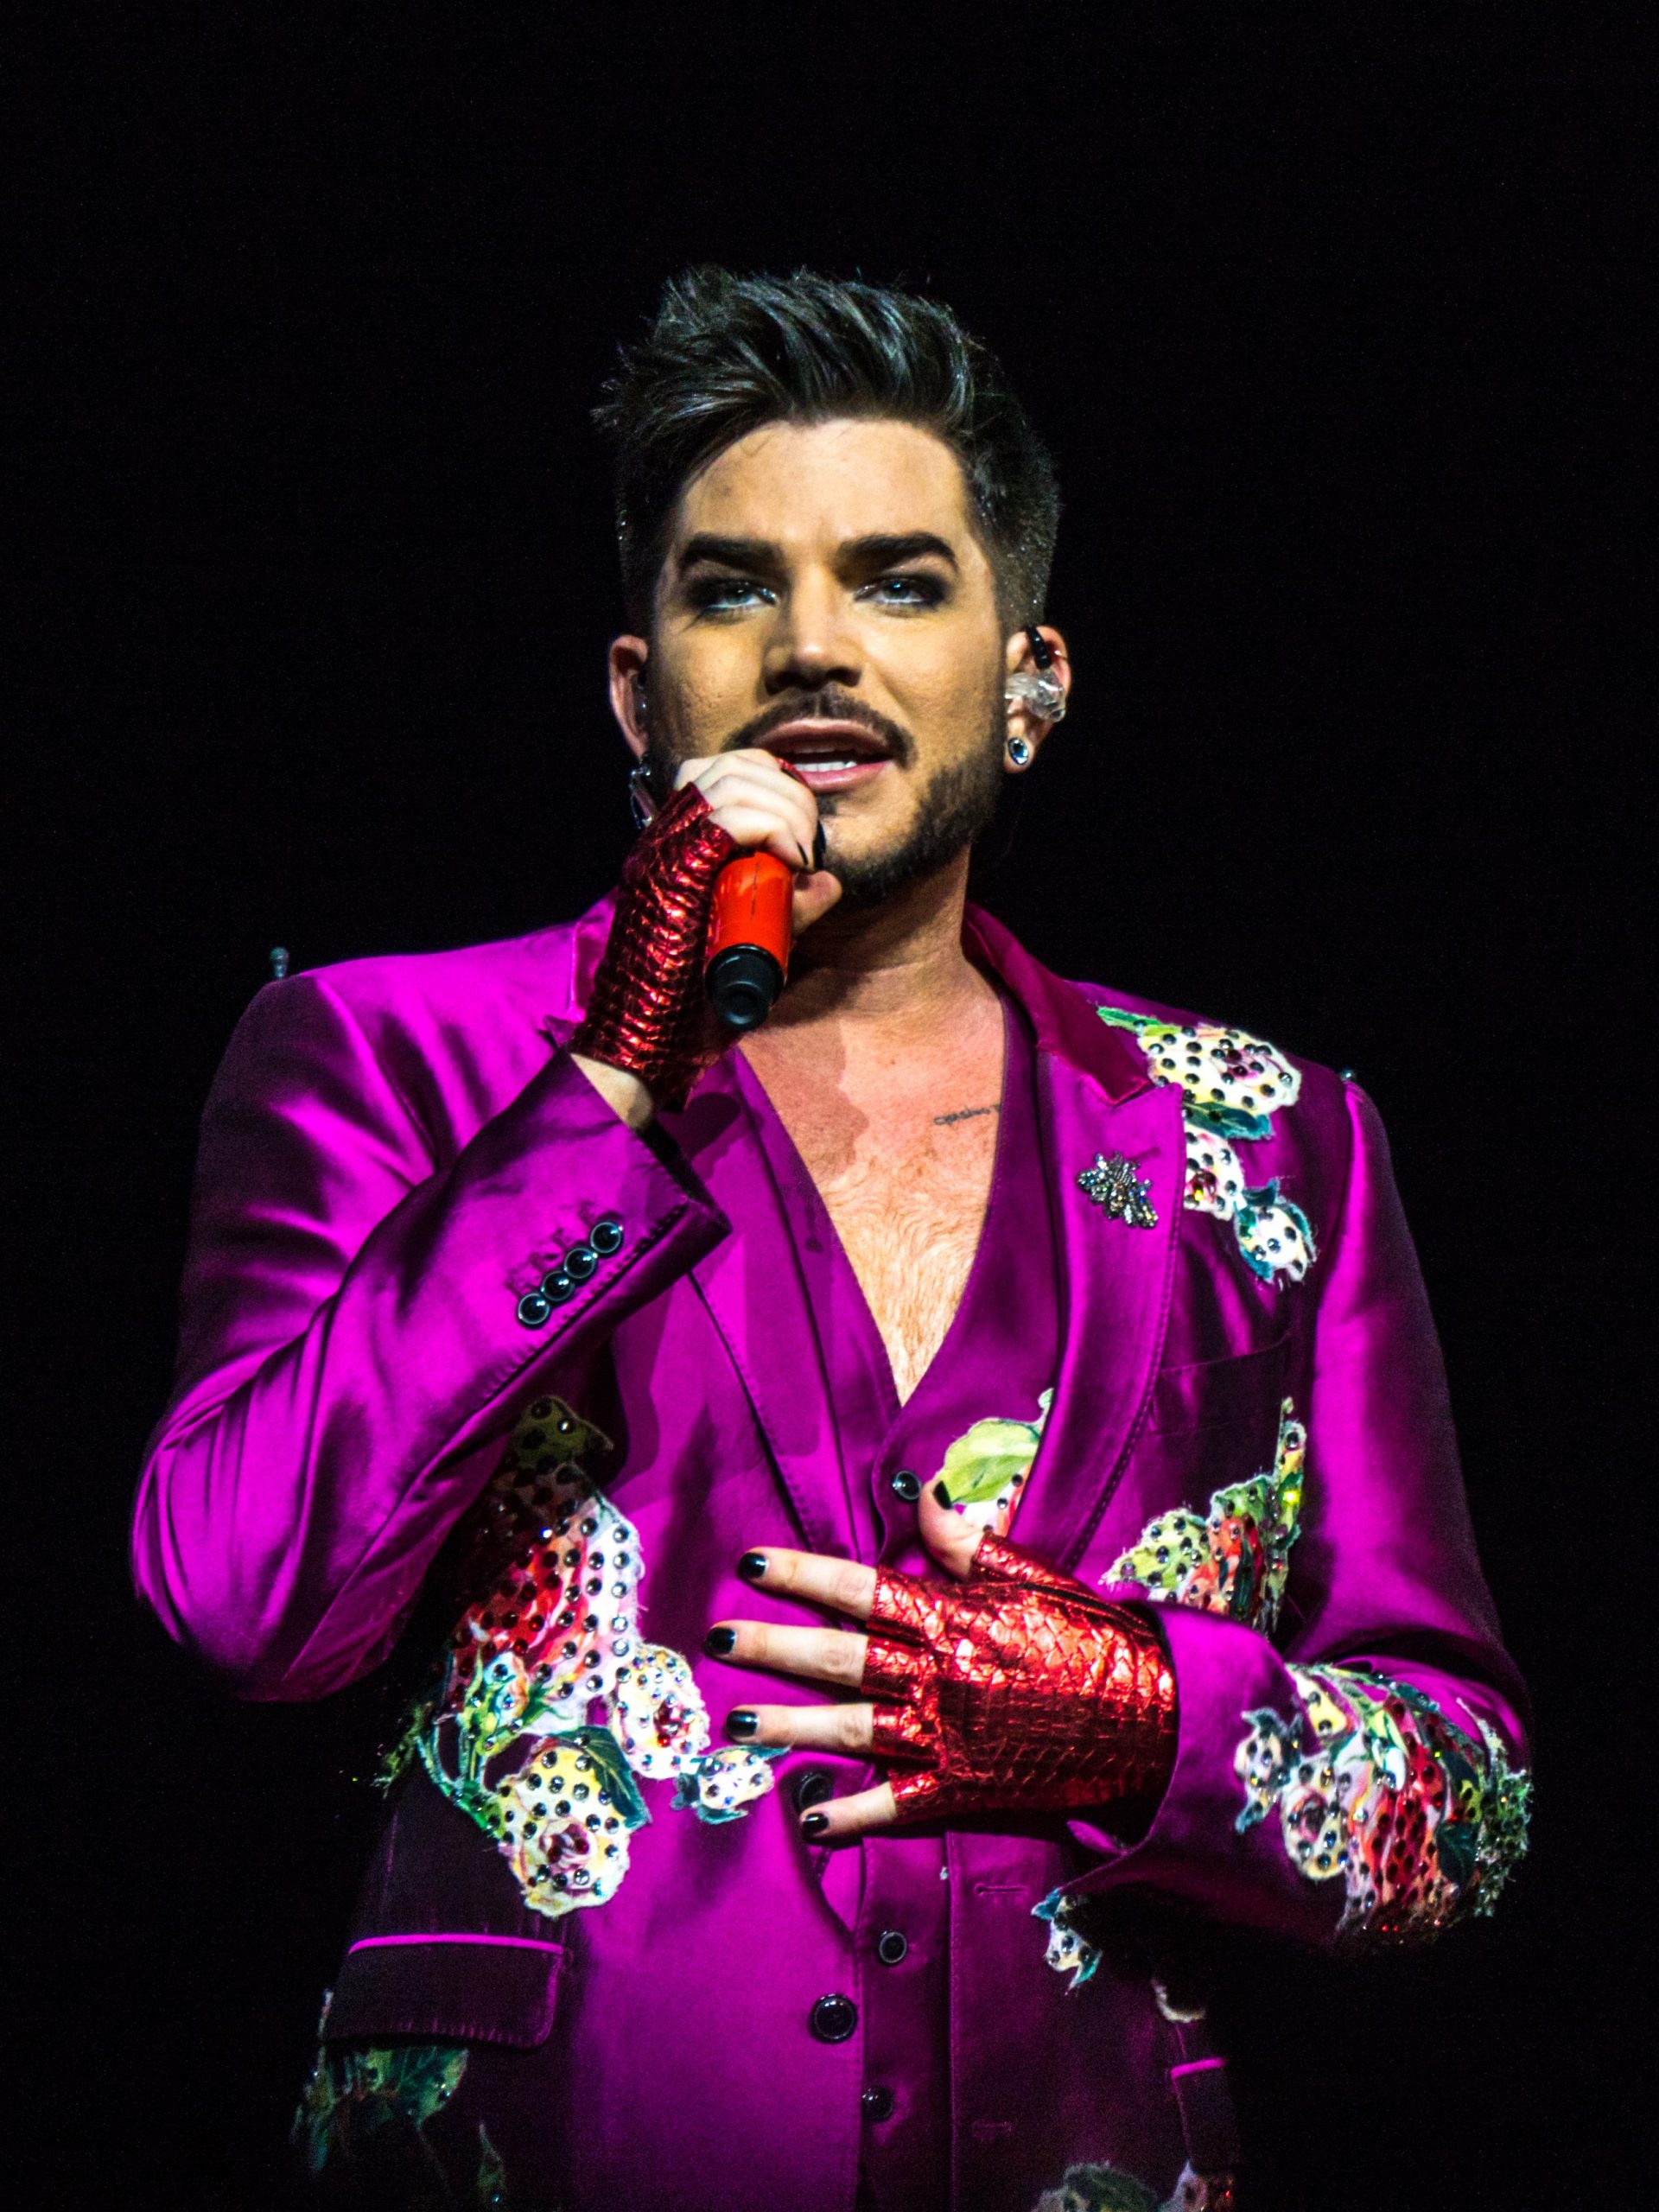 I Think It’s Time We Give Adam Lambert His Flowers Too